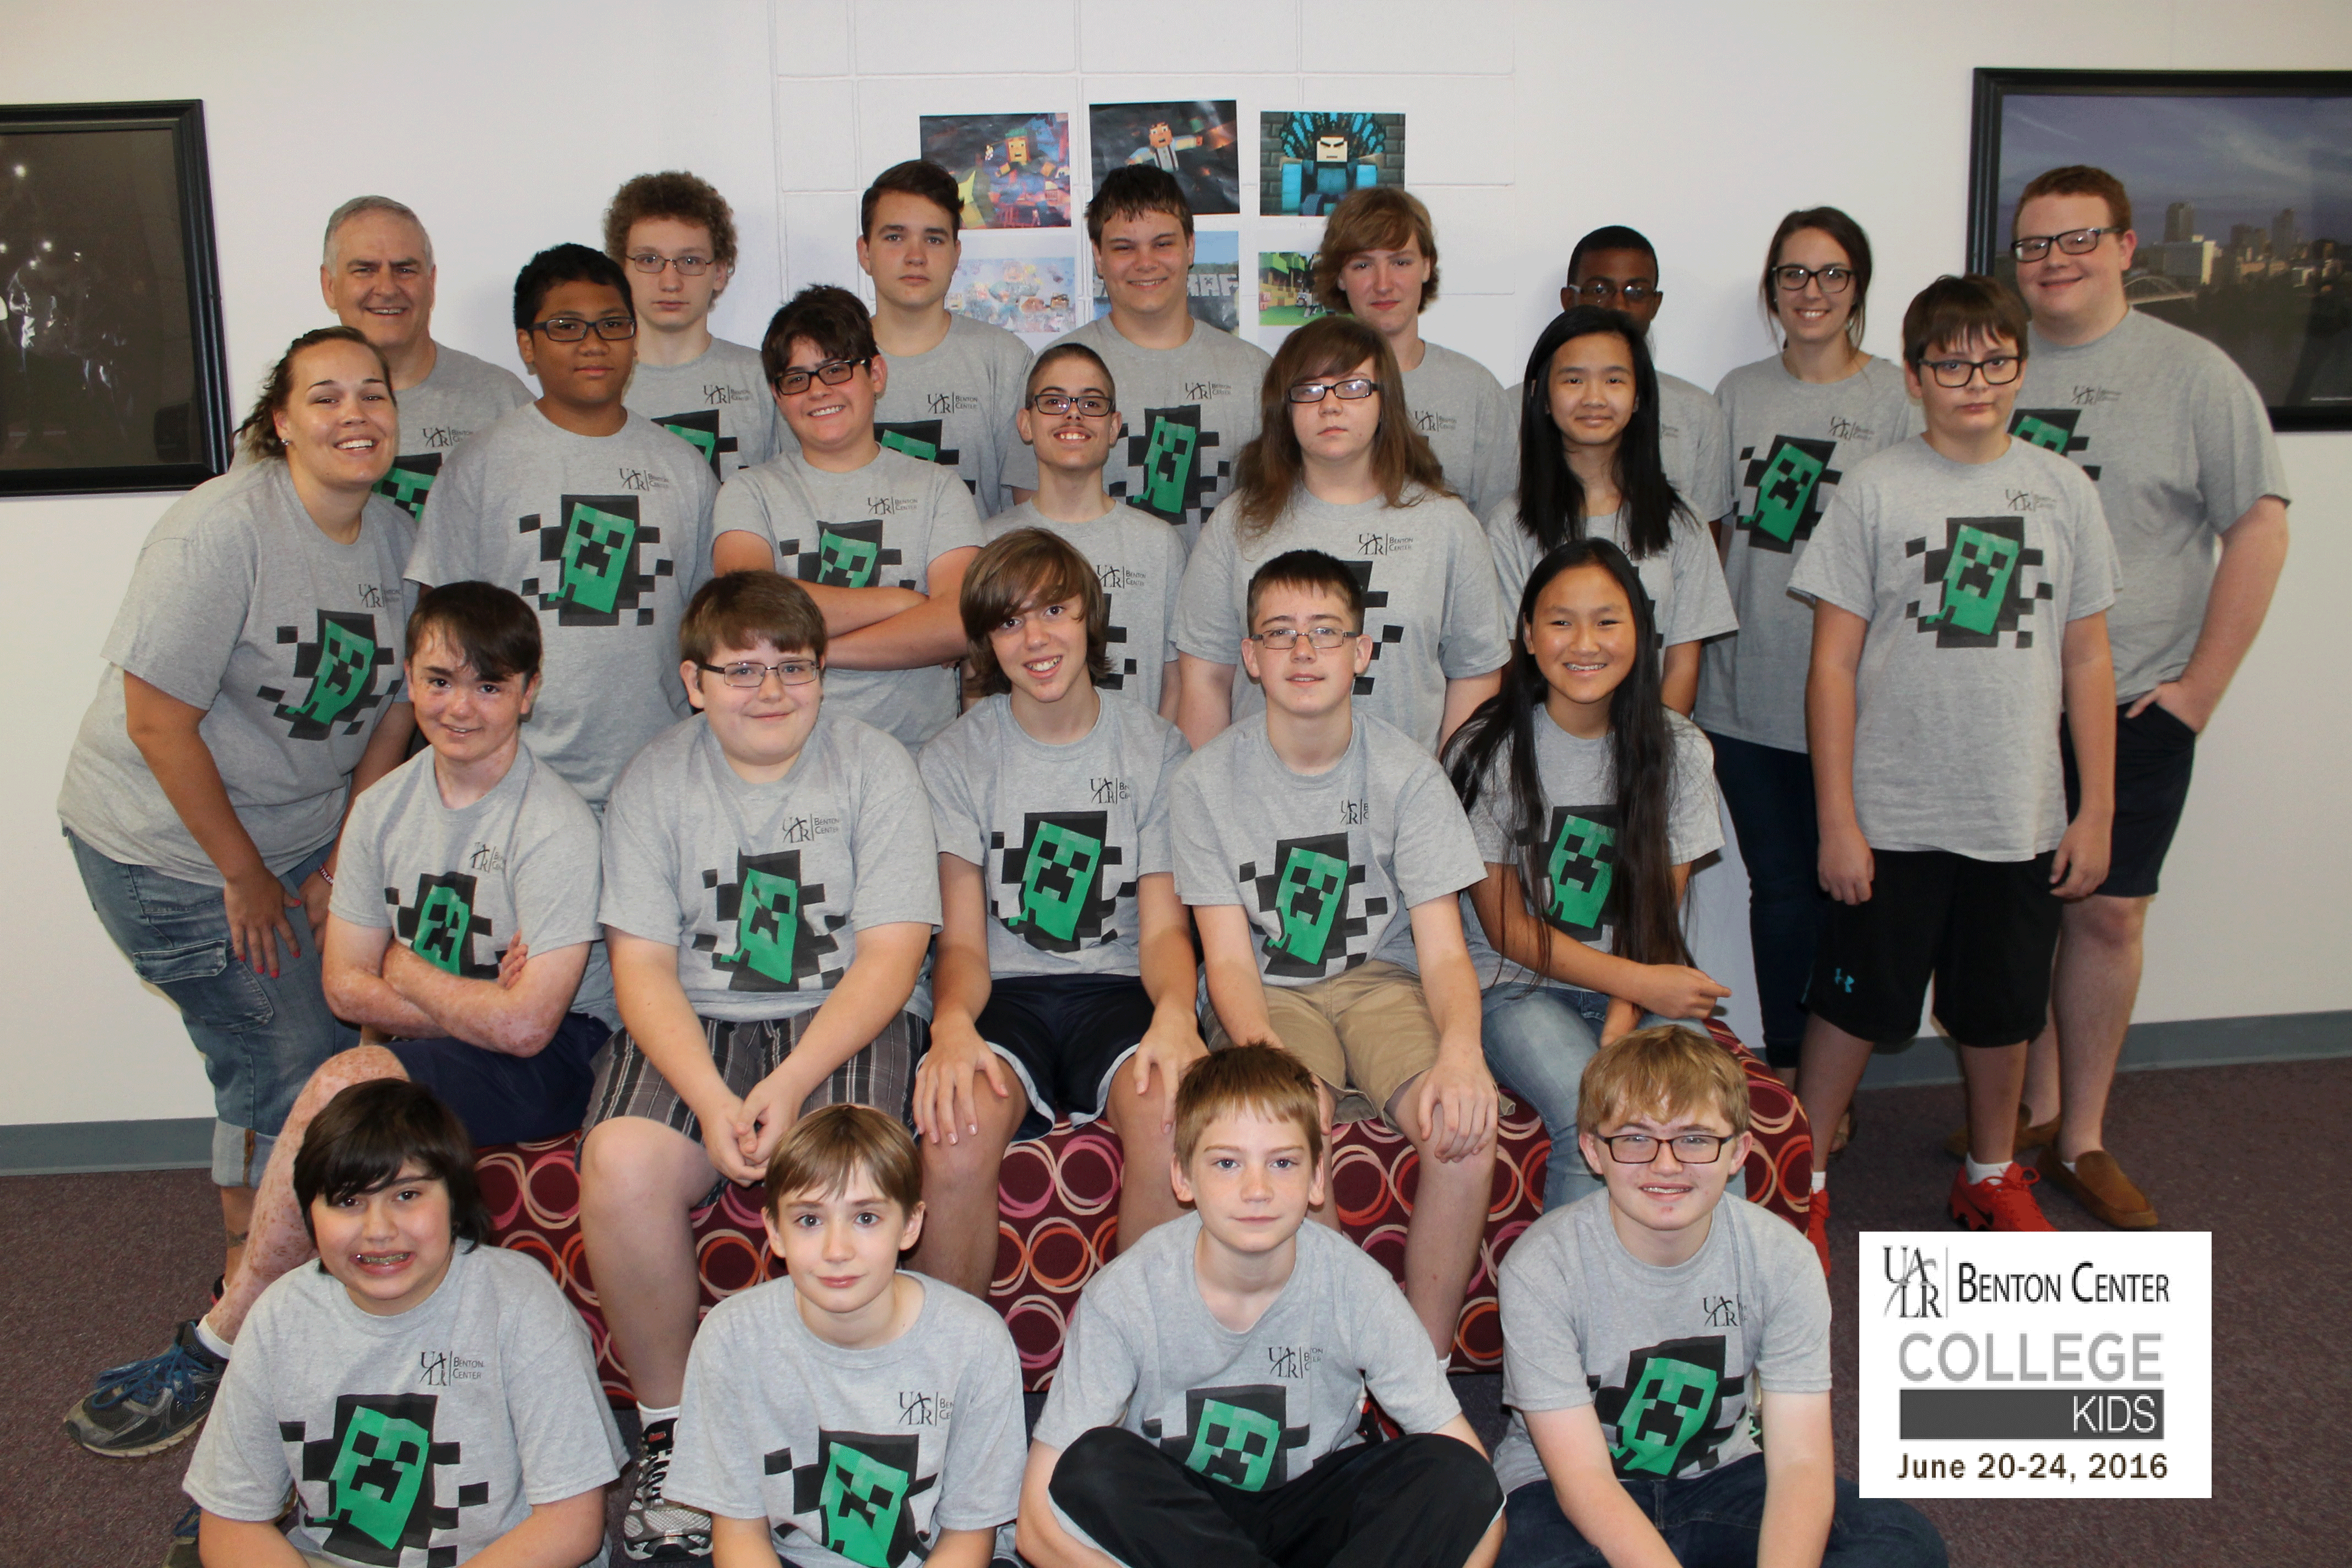 Members of the summer coding camp, from left to right, are: Front Row: Ramsey Alhajjaj, Zack Jennings, Jacob Ivy, and Stuart Walker; Second Row: Cotton Ward, Ethan Blackford, Colbe Cortez, Ryan Wells, and Maya Henderson; Third Row: Supervisor Angela Paladino, Alex Lee, Andrew Mencer, Brodie Callicott, Mary Ashton, Selin Kartika, and Max Joseph; Back Row: Instructor Bruce Bauer, Matthew Bulthuis, Will Clay, Tucker Williams, Bishop Butler, J’Lun Herron, Instructor Carole Ann Ramsey, and Supervisor Tucker Partridge.